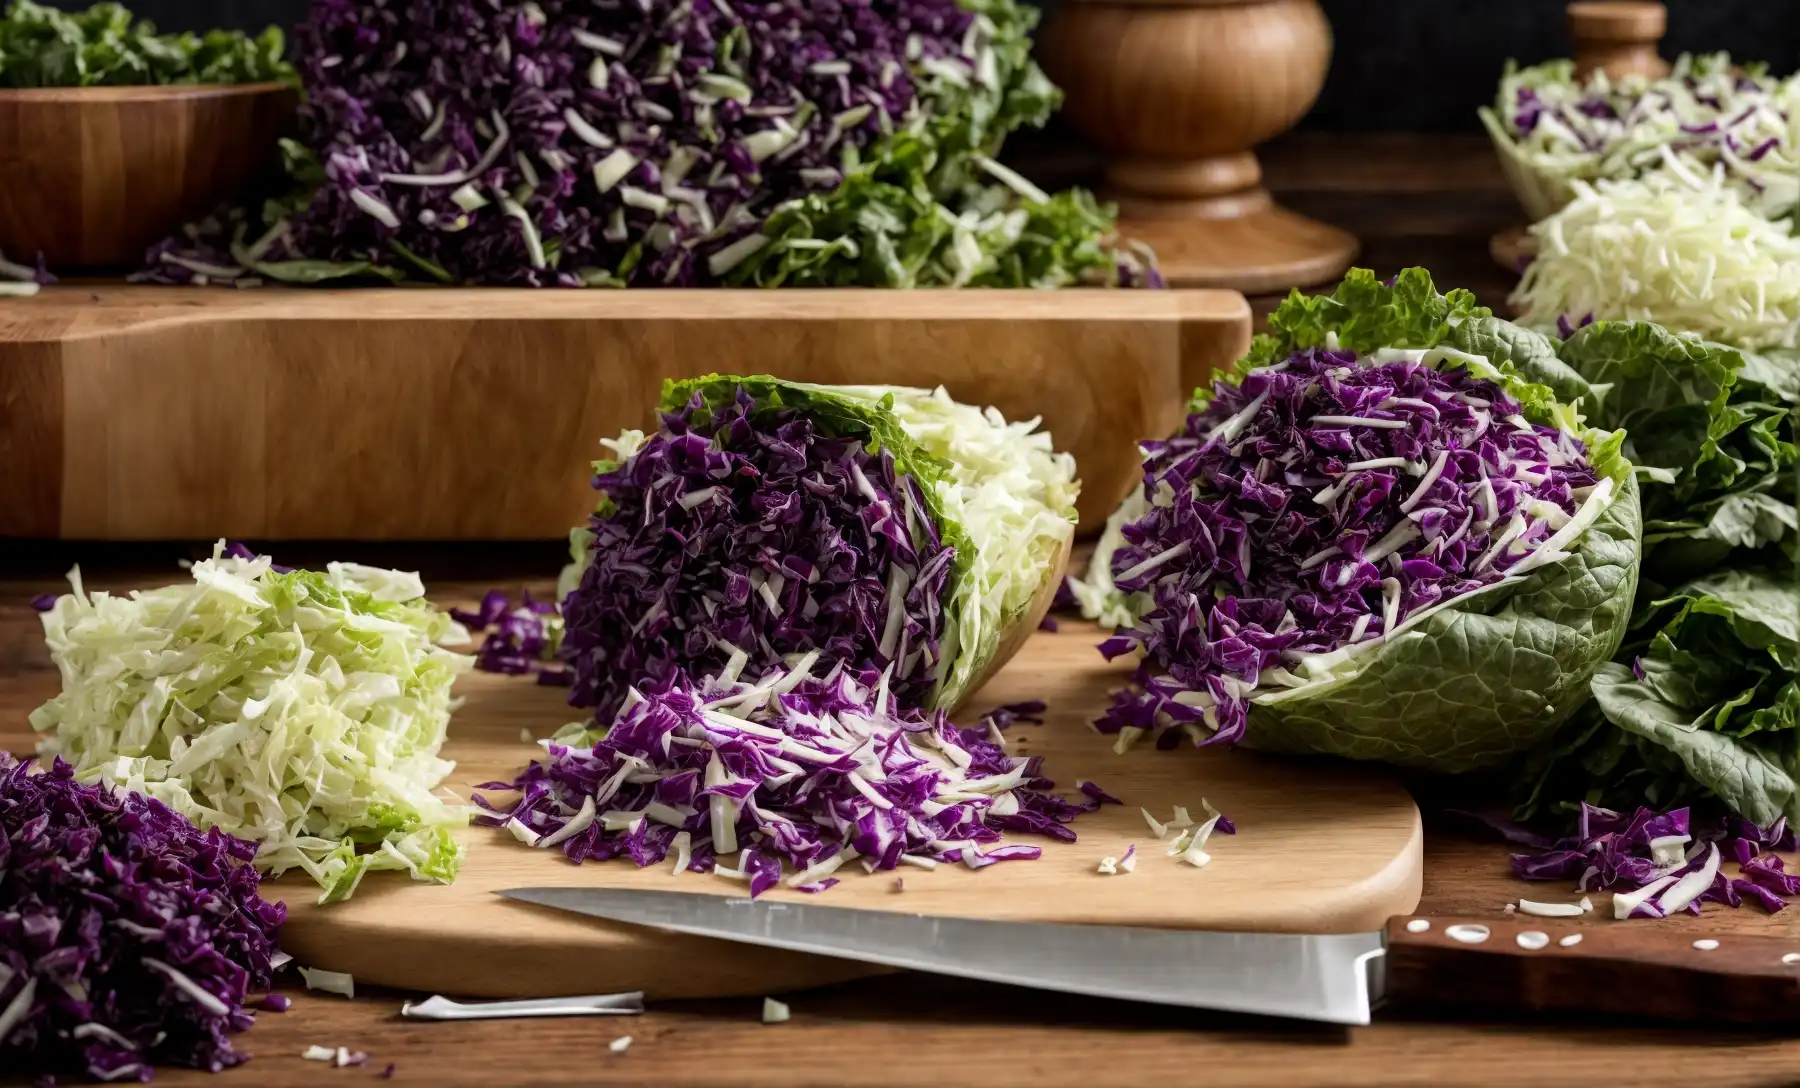 How to Know If Shredded Cabbage is Bad